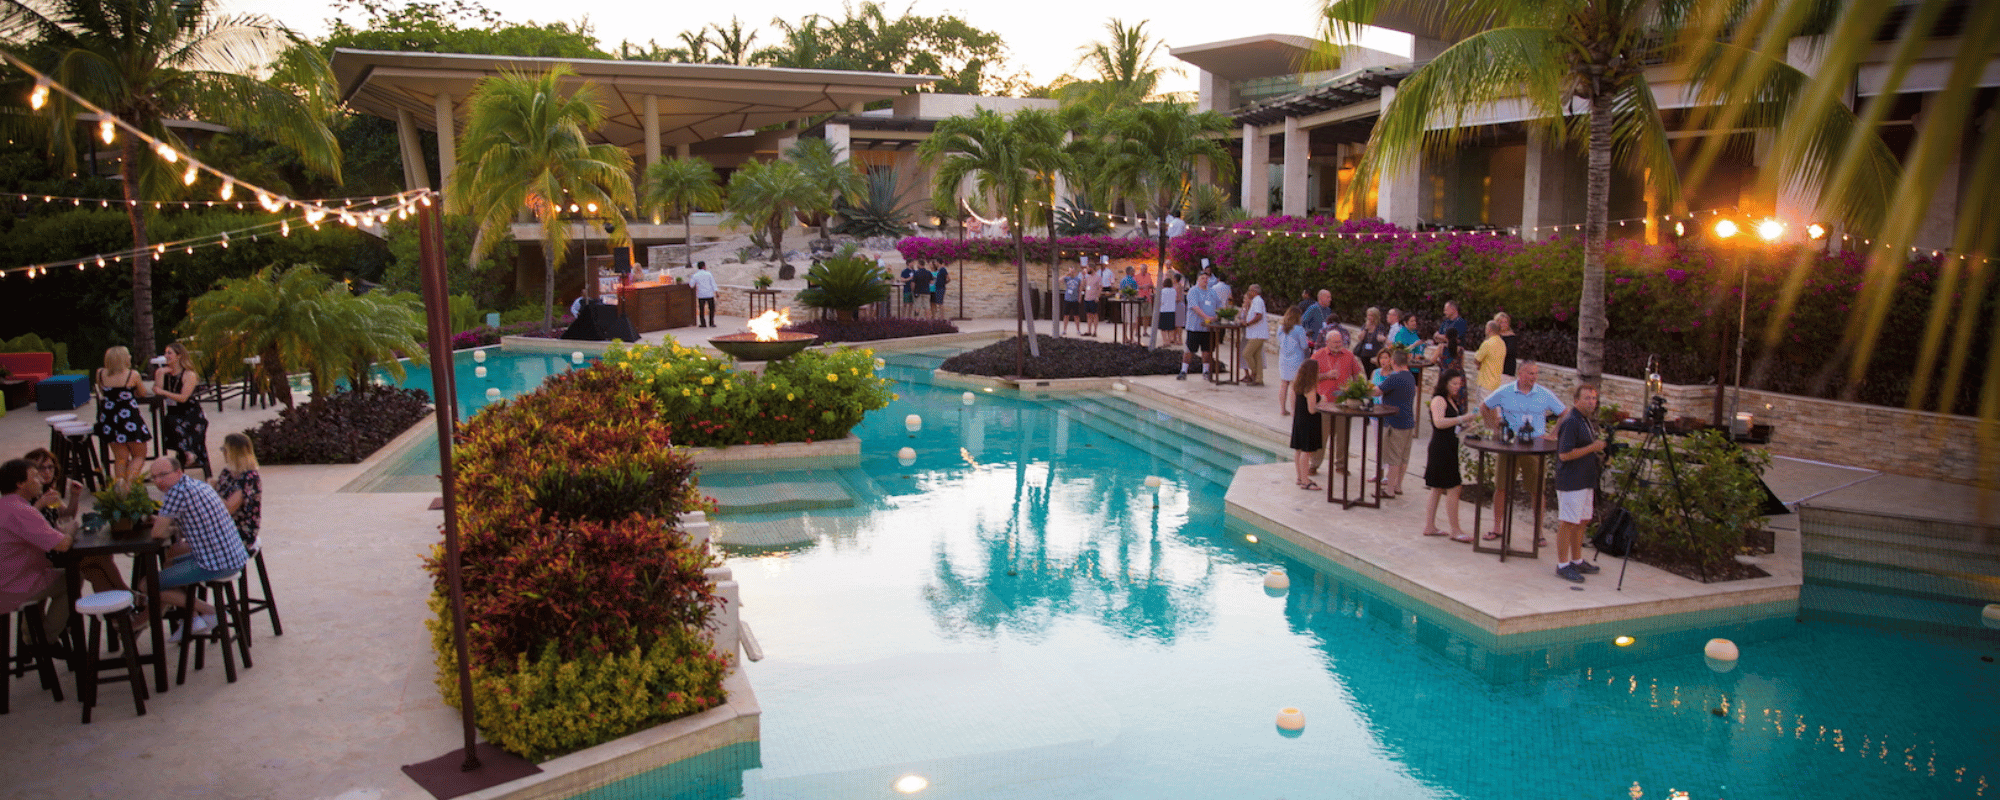 various people enjoying networking during incentive travel at a resort pool